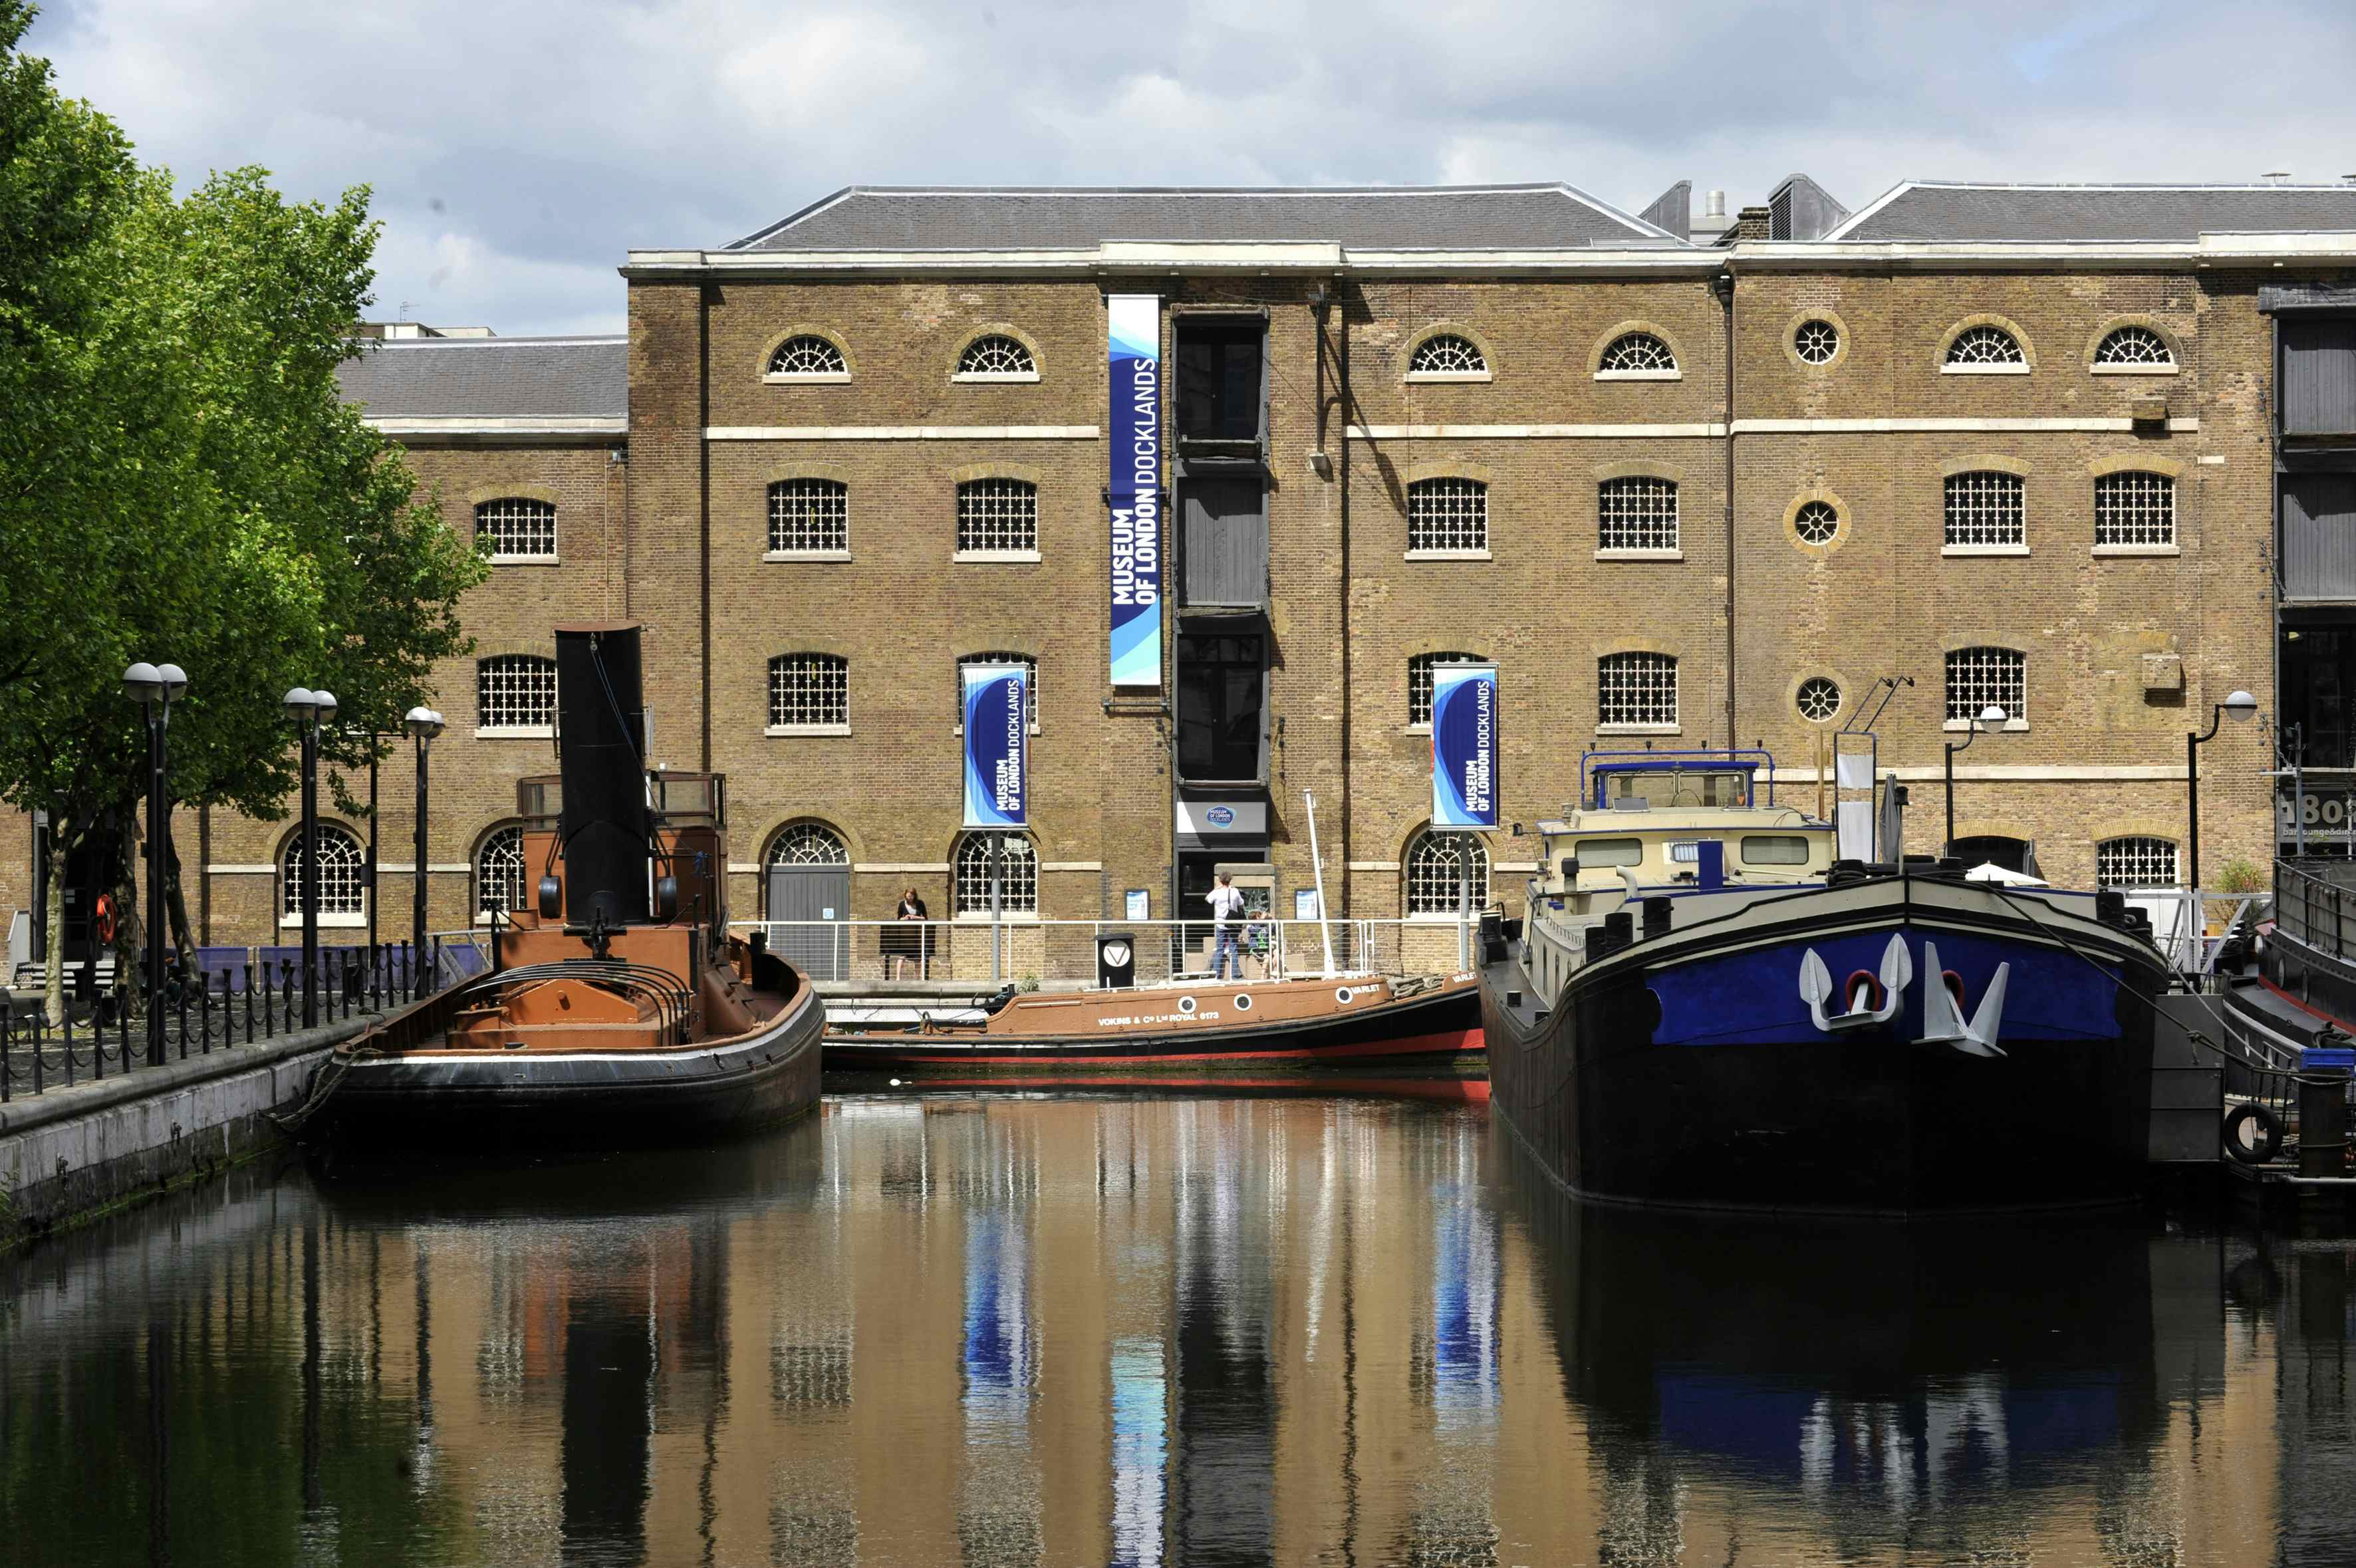 Muscovado Hall and Terrace, Museum of London Docklands